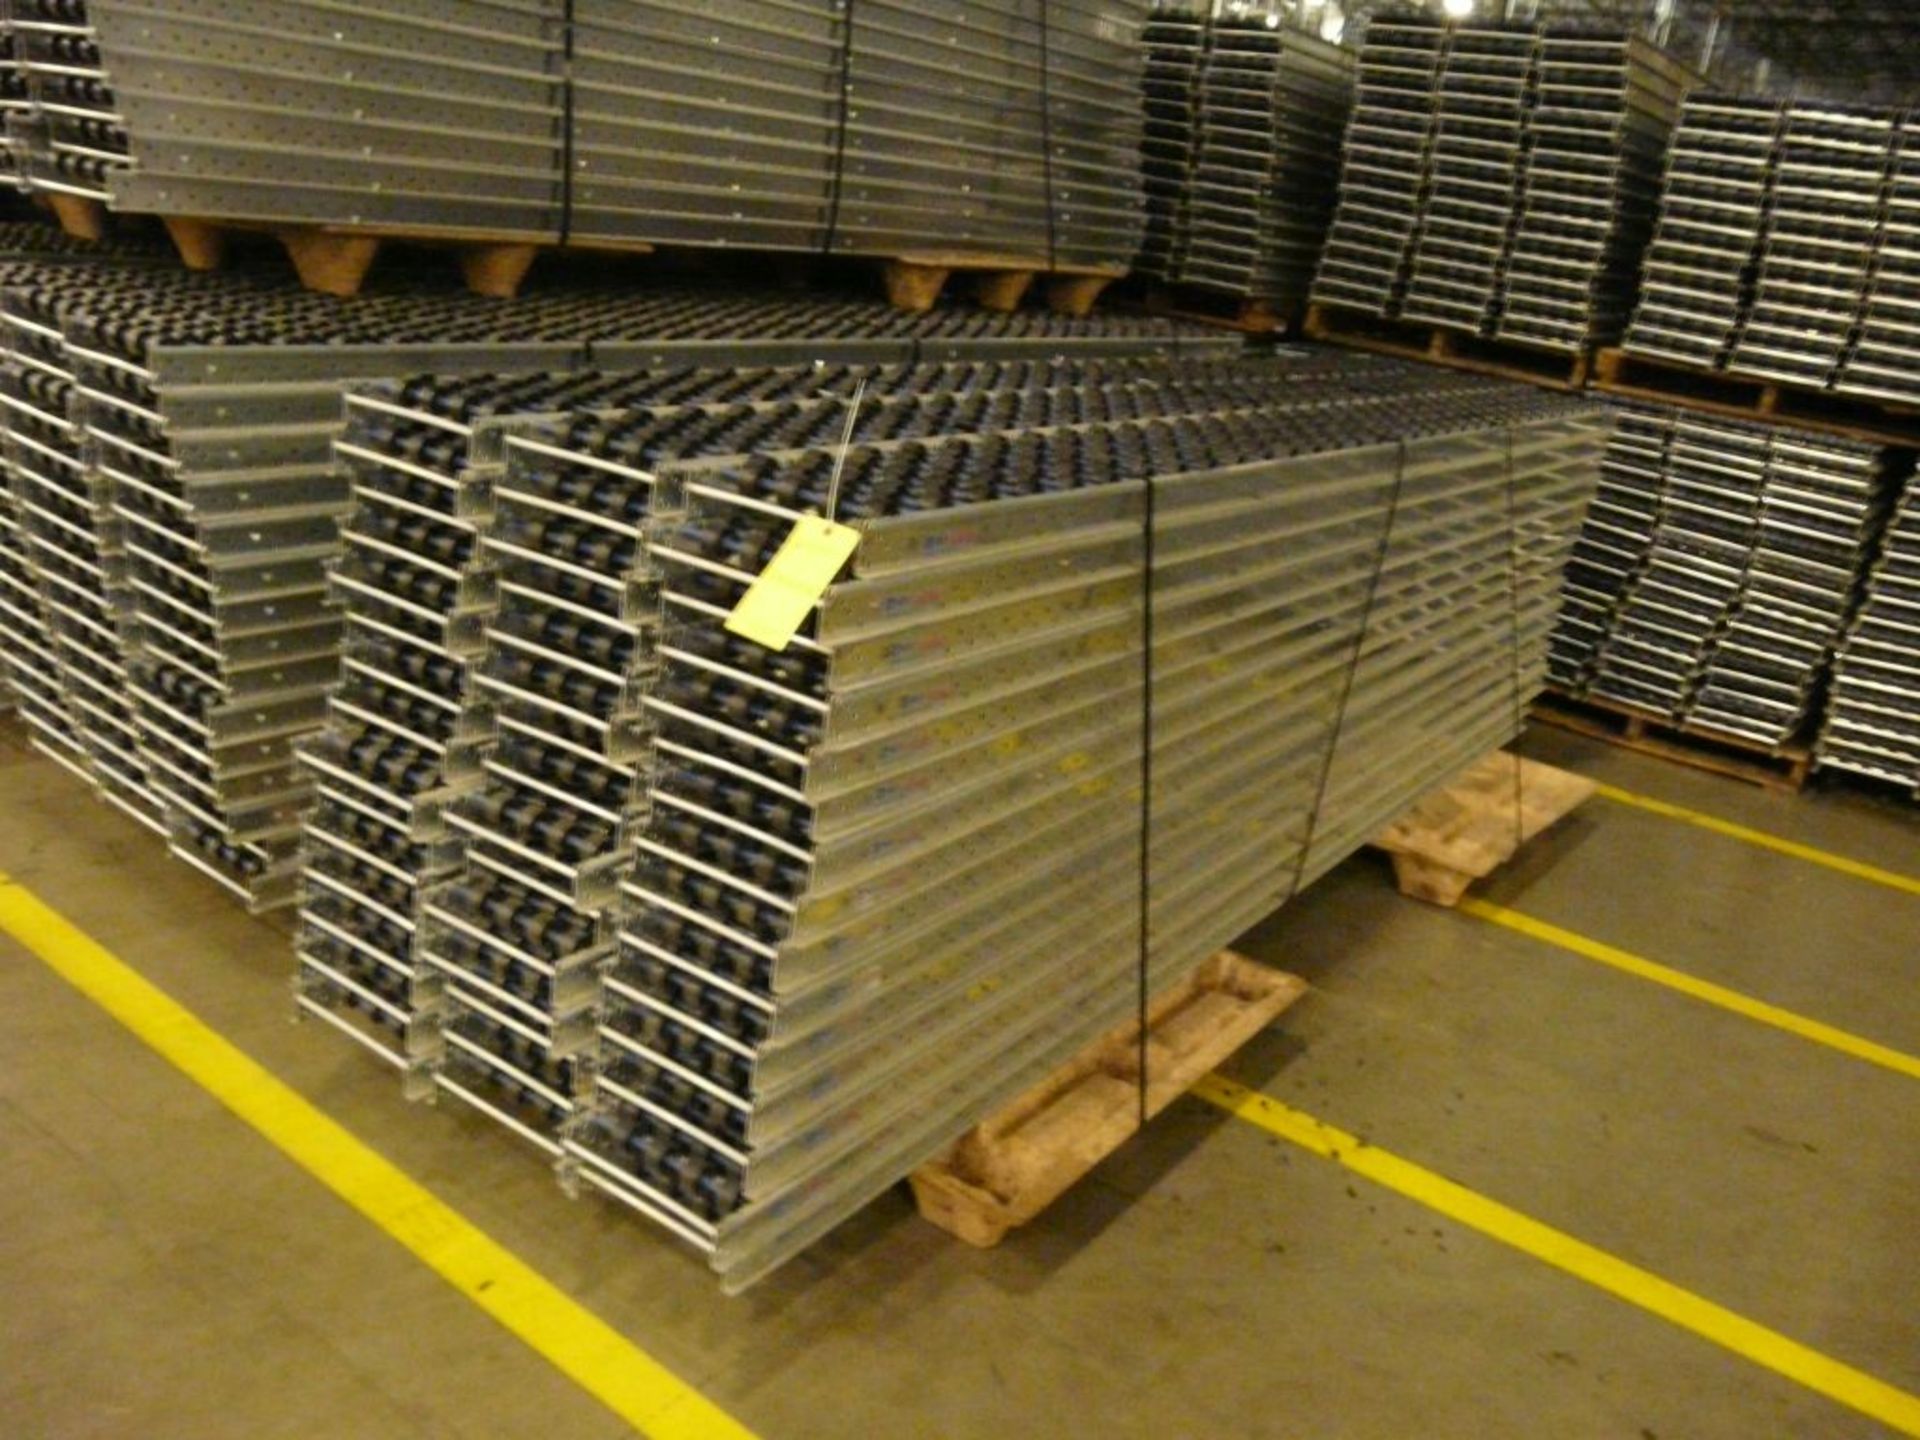 Lot of (90) SpanTrack Wheelbed Carton Flow Conveyors - 11.5'L x 11"W; Tag: 223565 - $30 Lot